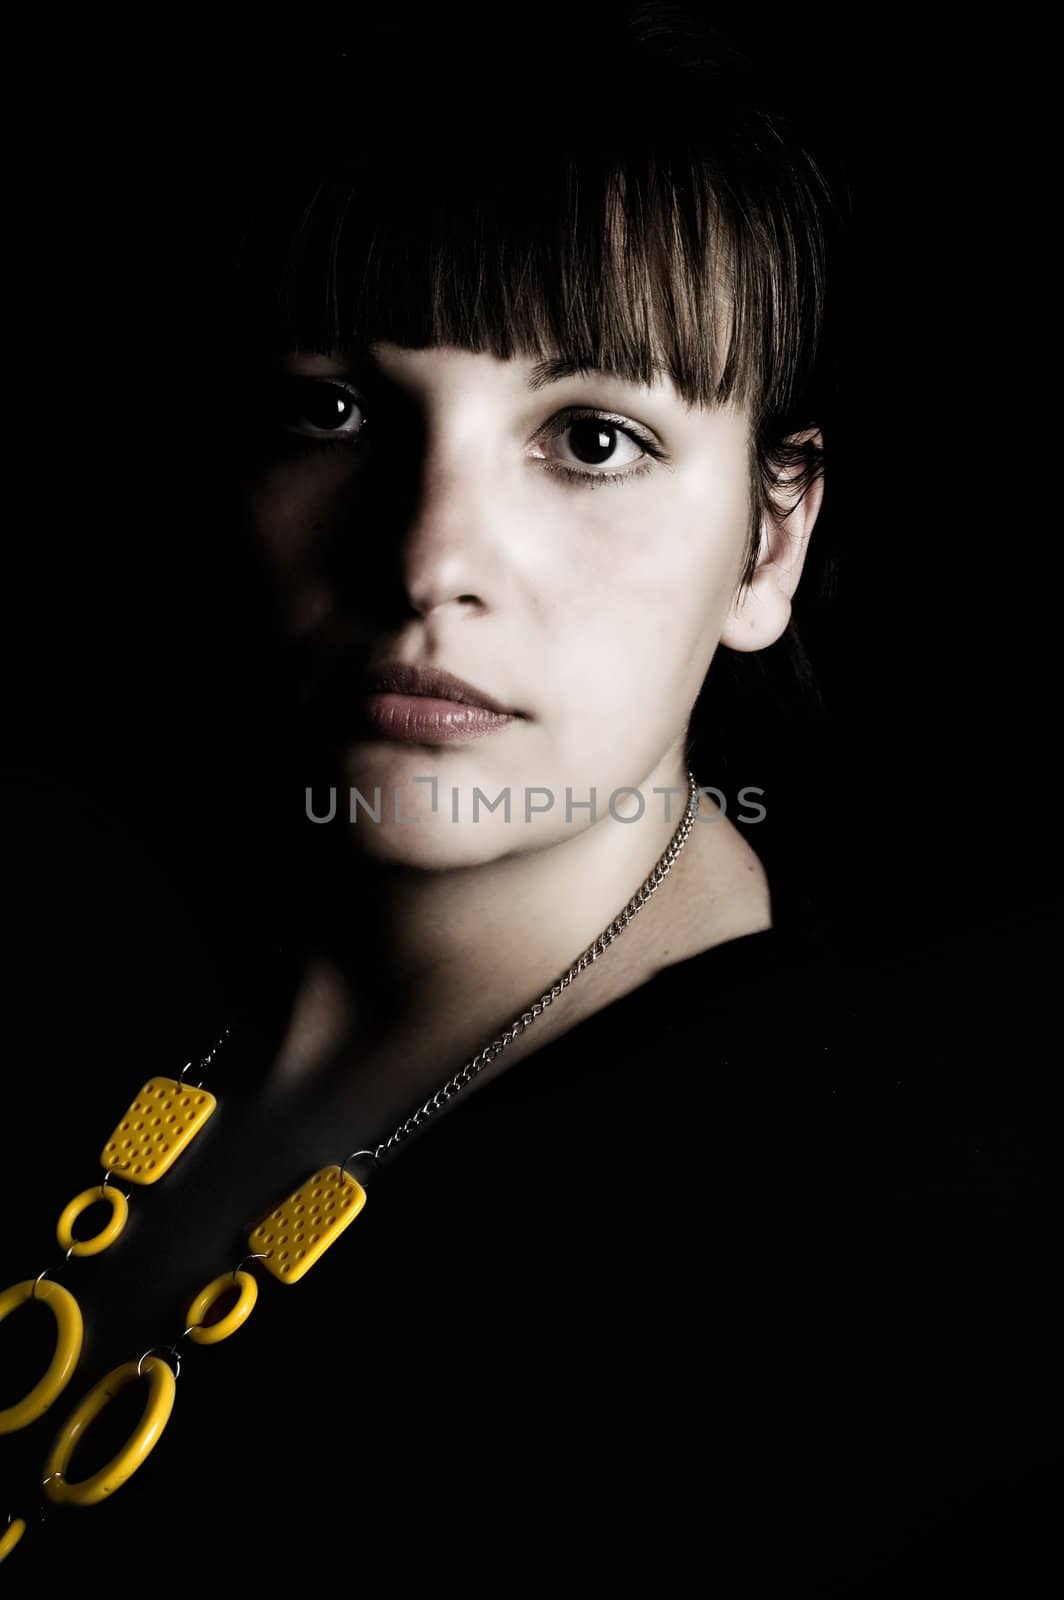 Studio portrait of pretty young woman wearing neacklace.